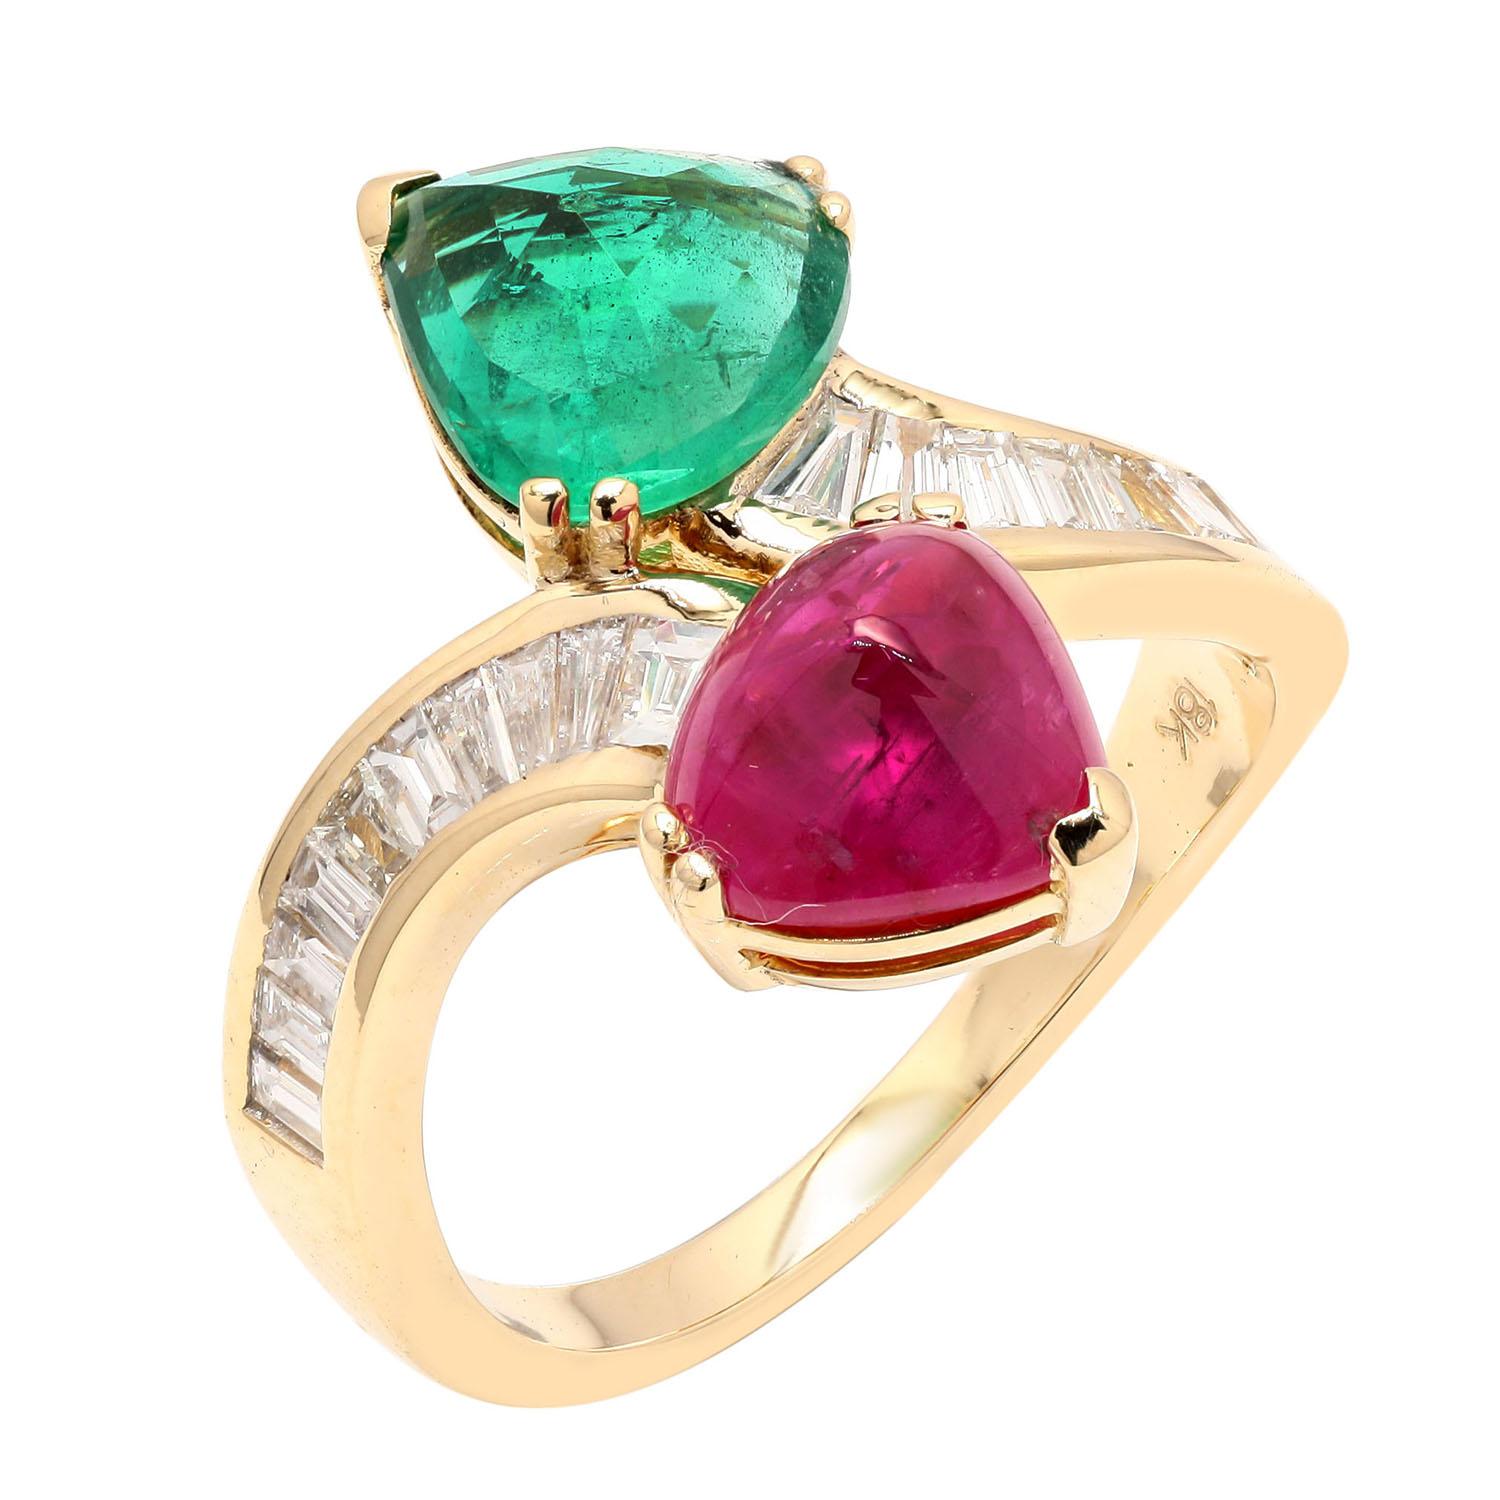 Women's Toi Et Moi Ruby & Emerald Hearts Ring With Diamonds Made In 18k Yellow Gold For Sale